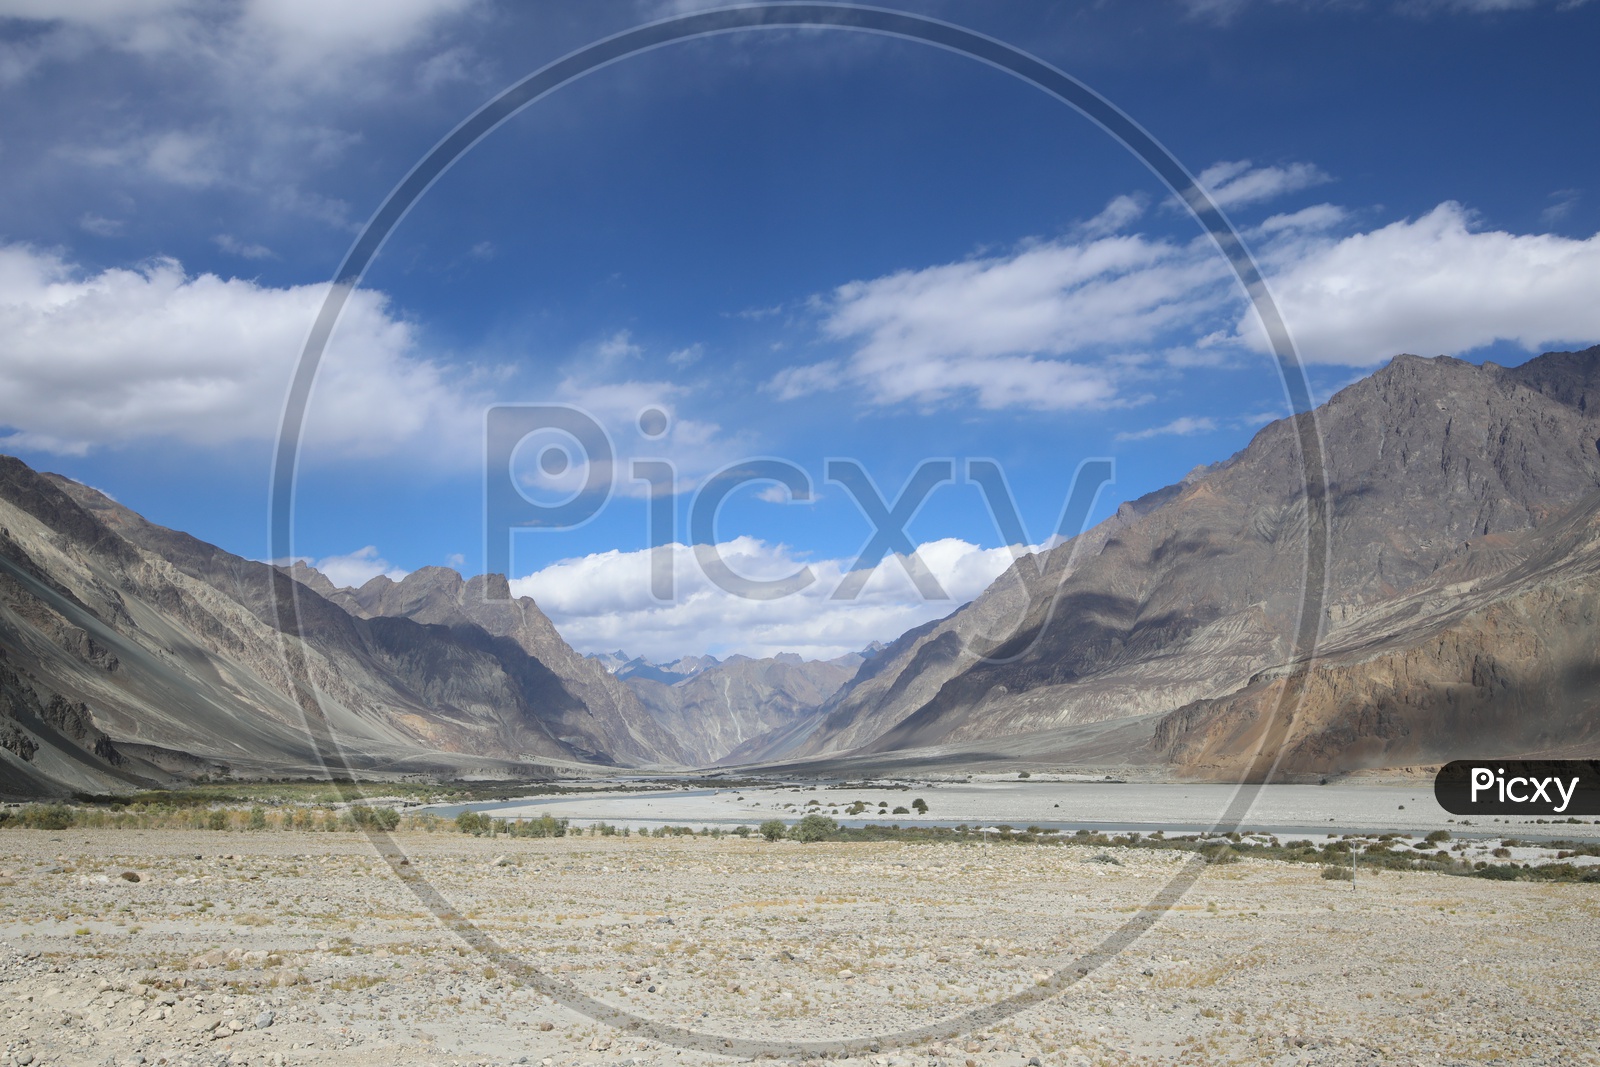 Beautiful landscape of Himalayas mountains from leh